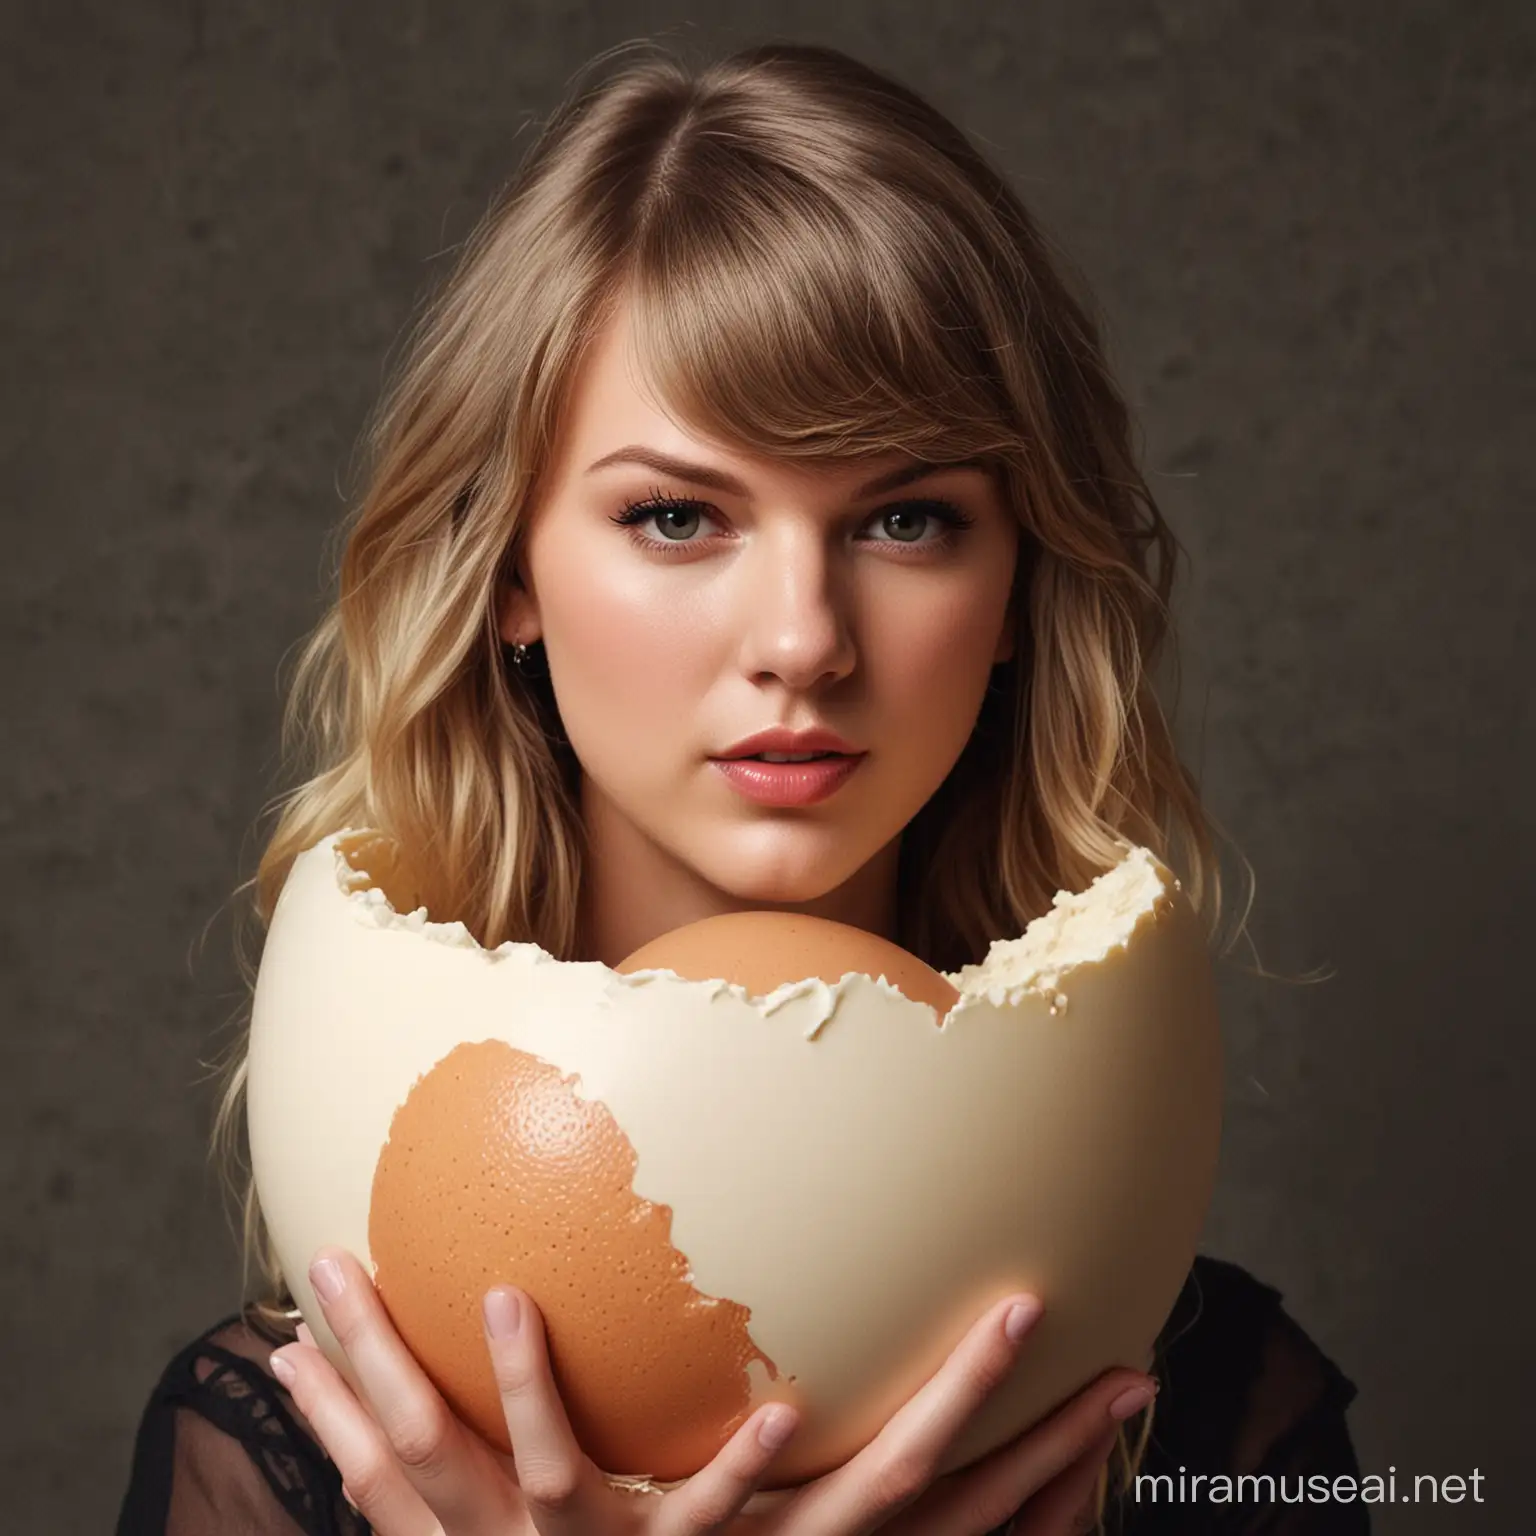 Taylor Swift hatching from an egg, she is covered in mucus and placenta